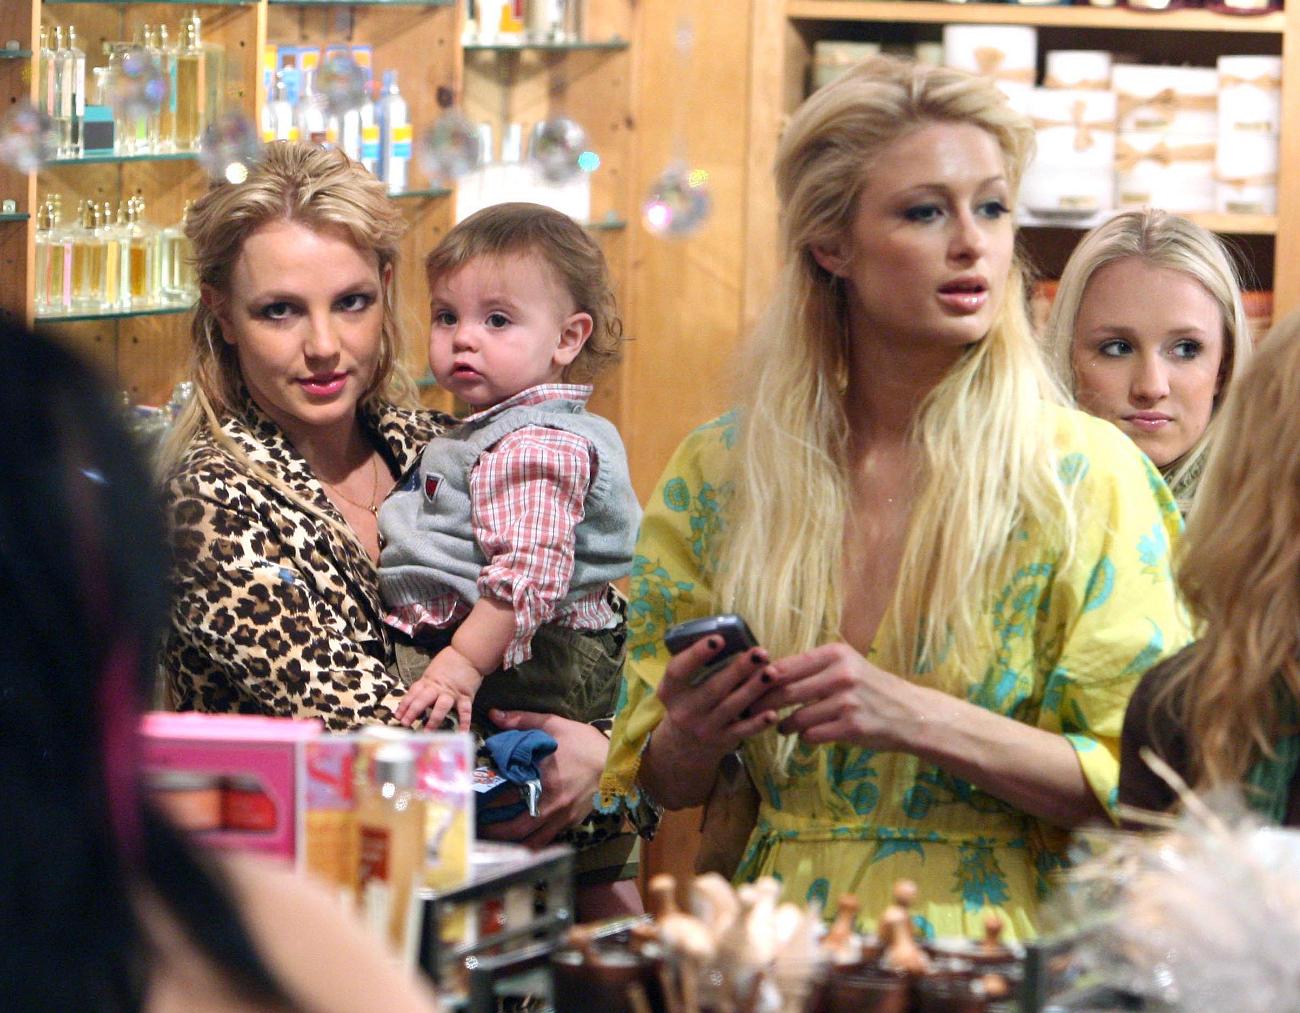 Paris Hilton and Britney Spears photographed inside a store.